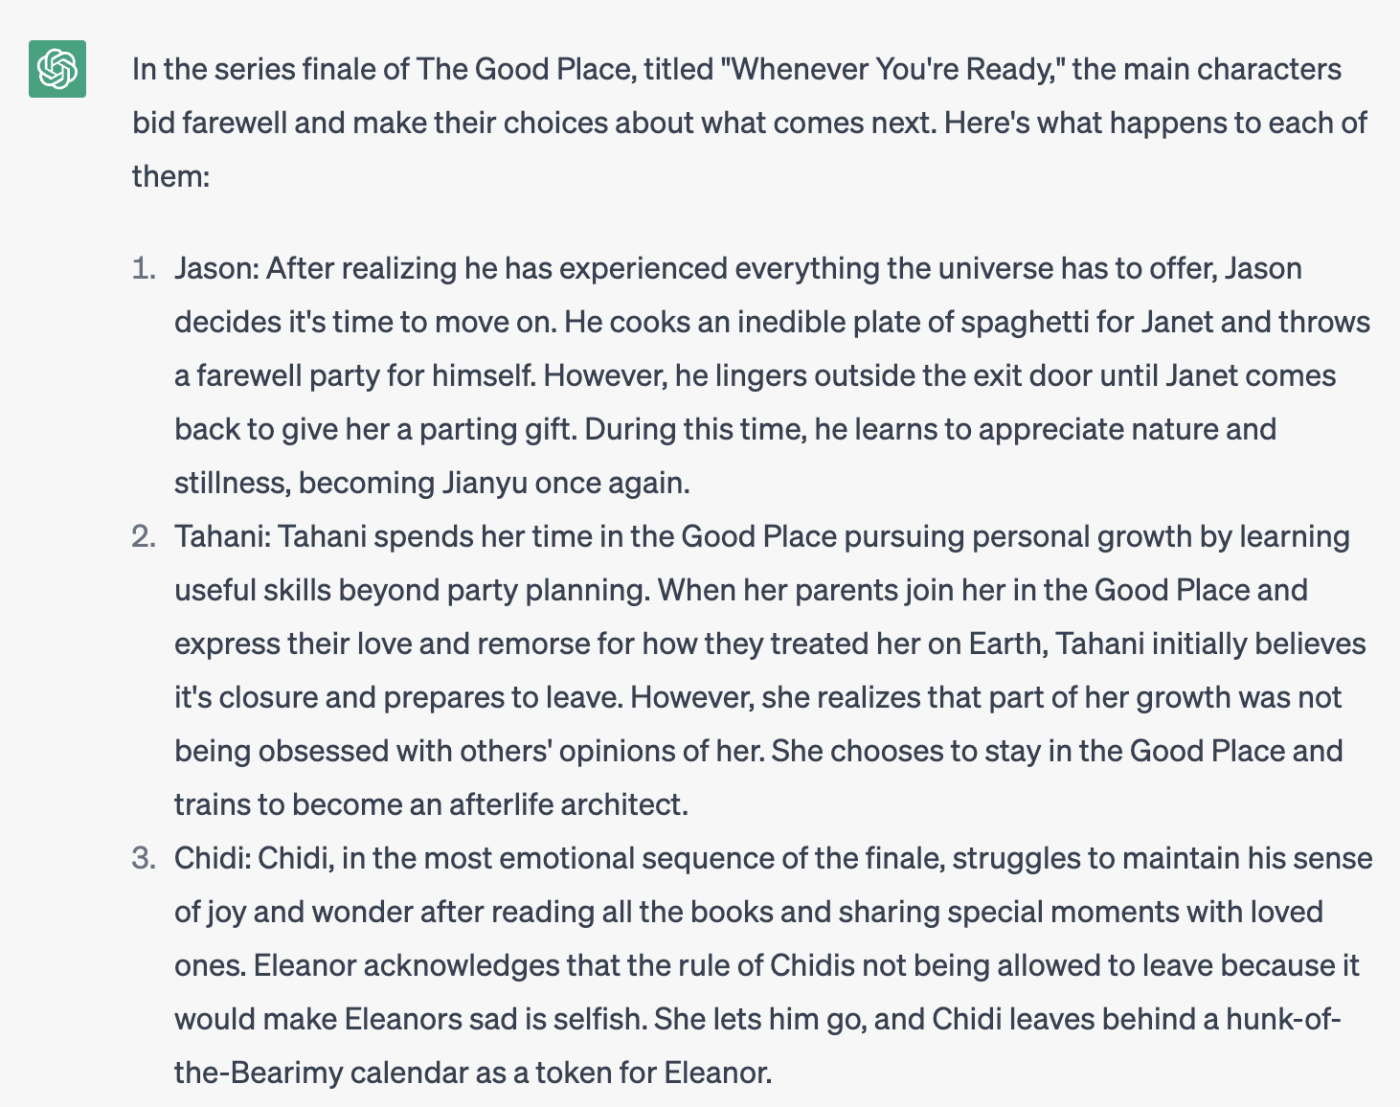 Response from ChatGPT that gives a detailed summary of what happened to each of the main characters in the season finale of the TV show The Good Place. 